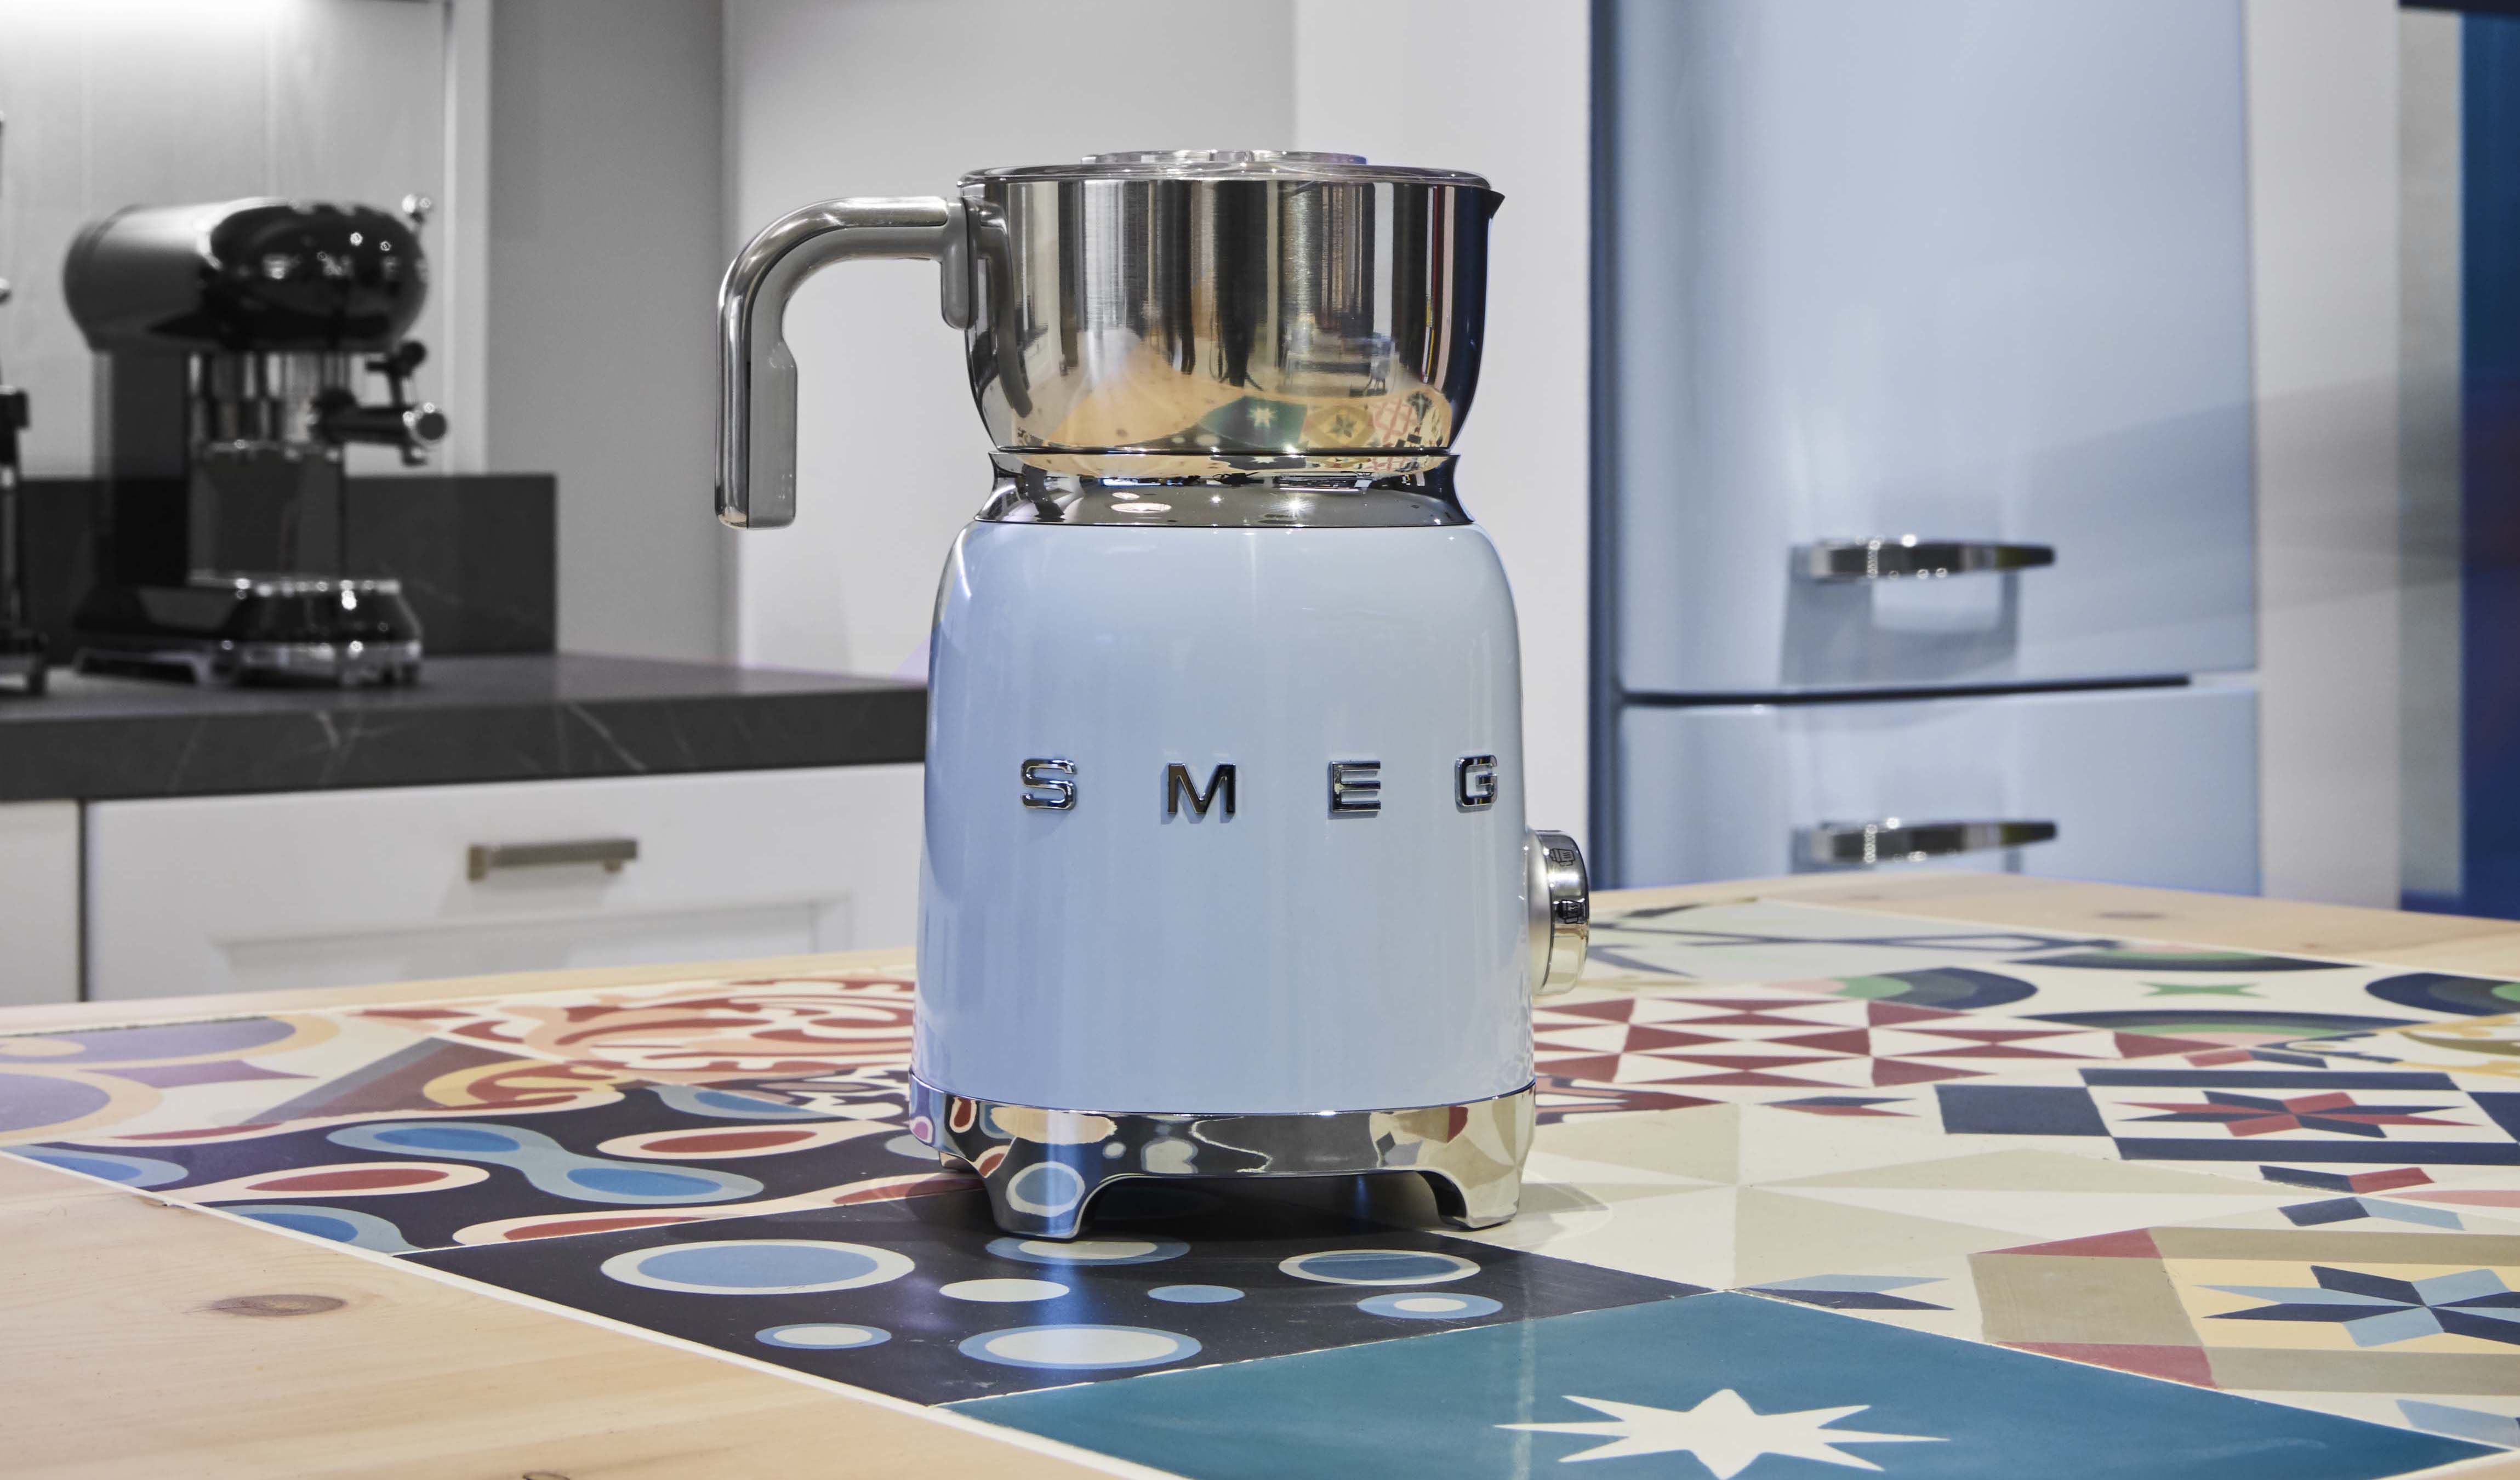 This Smeg milk frother makes homemade matcha and lattés a breeze - Reviewed